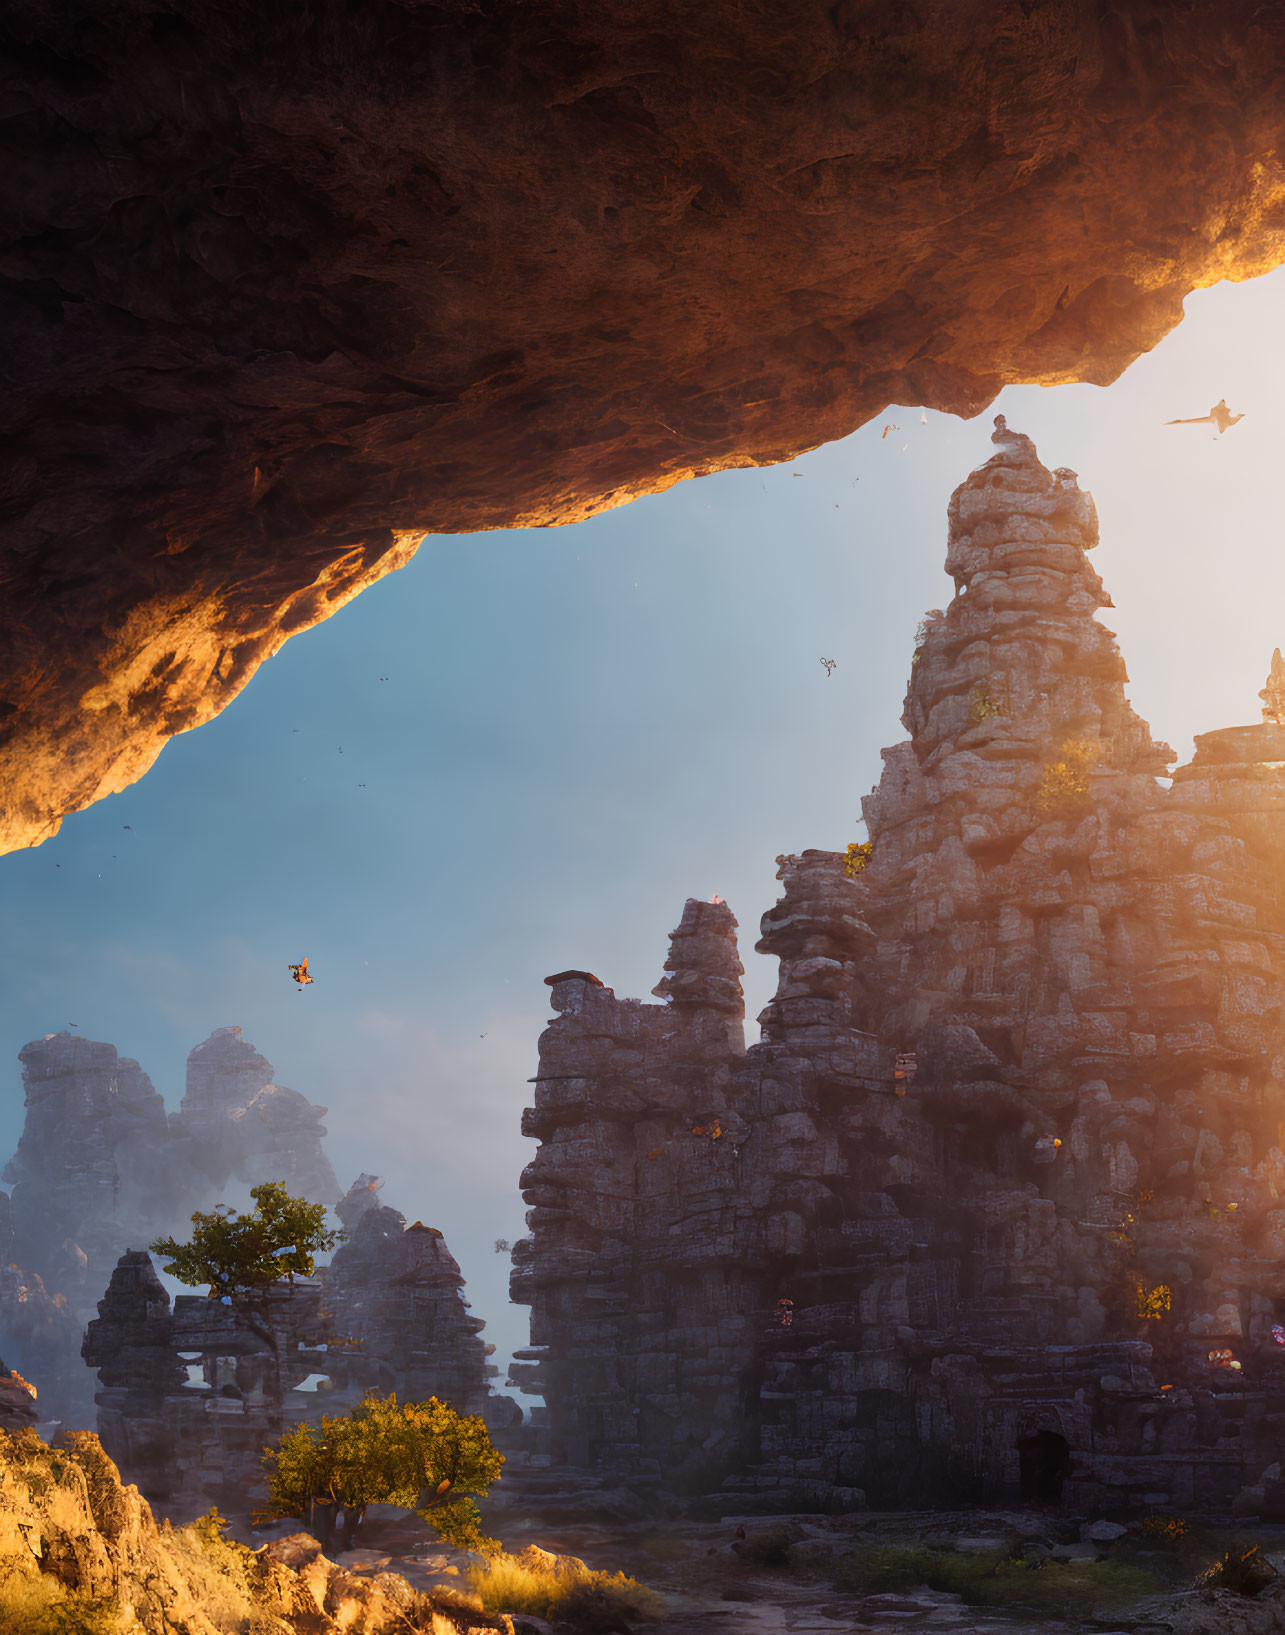 Ethereal landscape with towering rock formations and sunlight filtering in